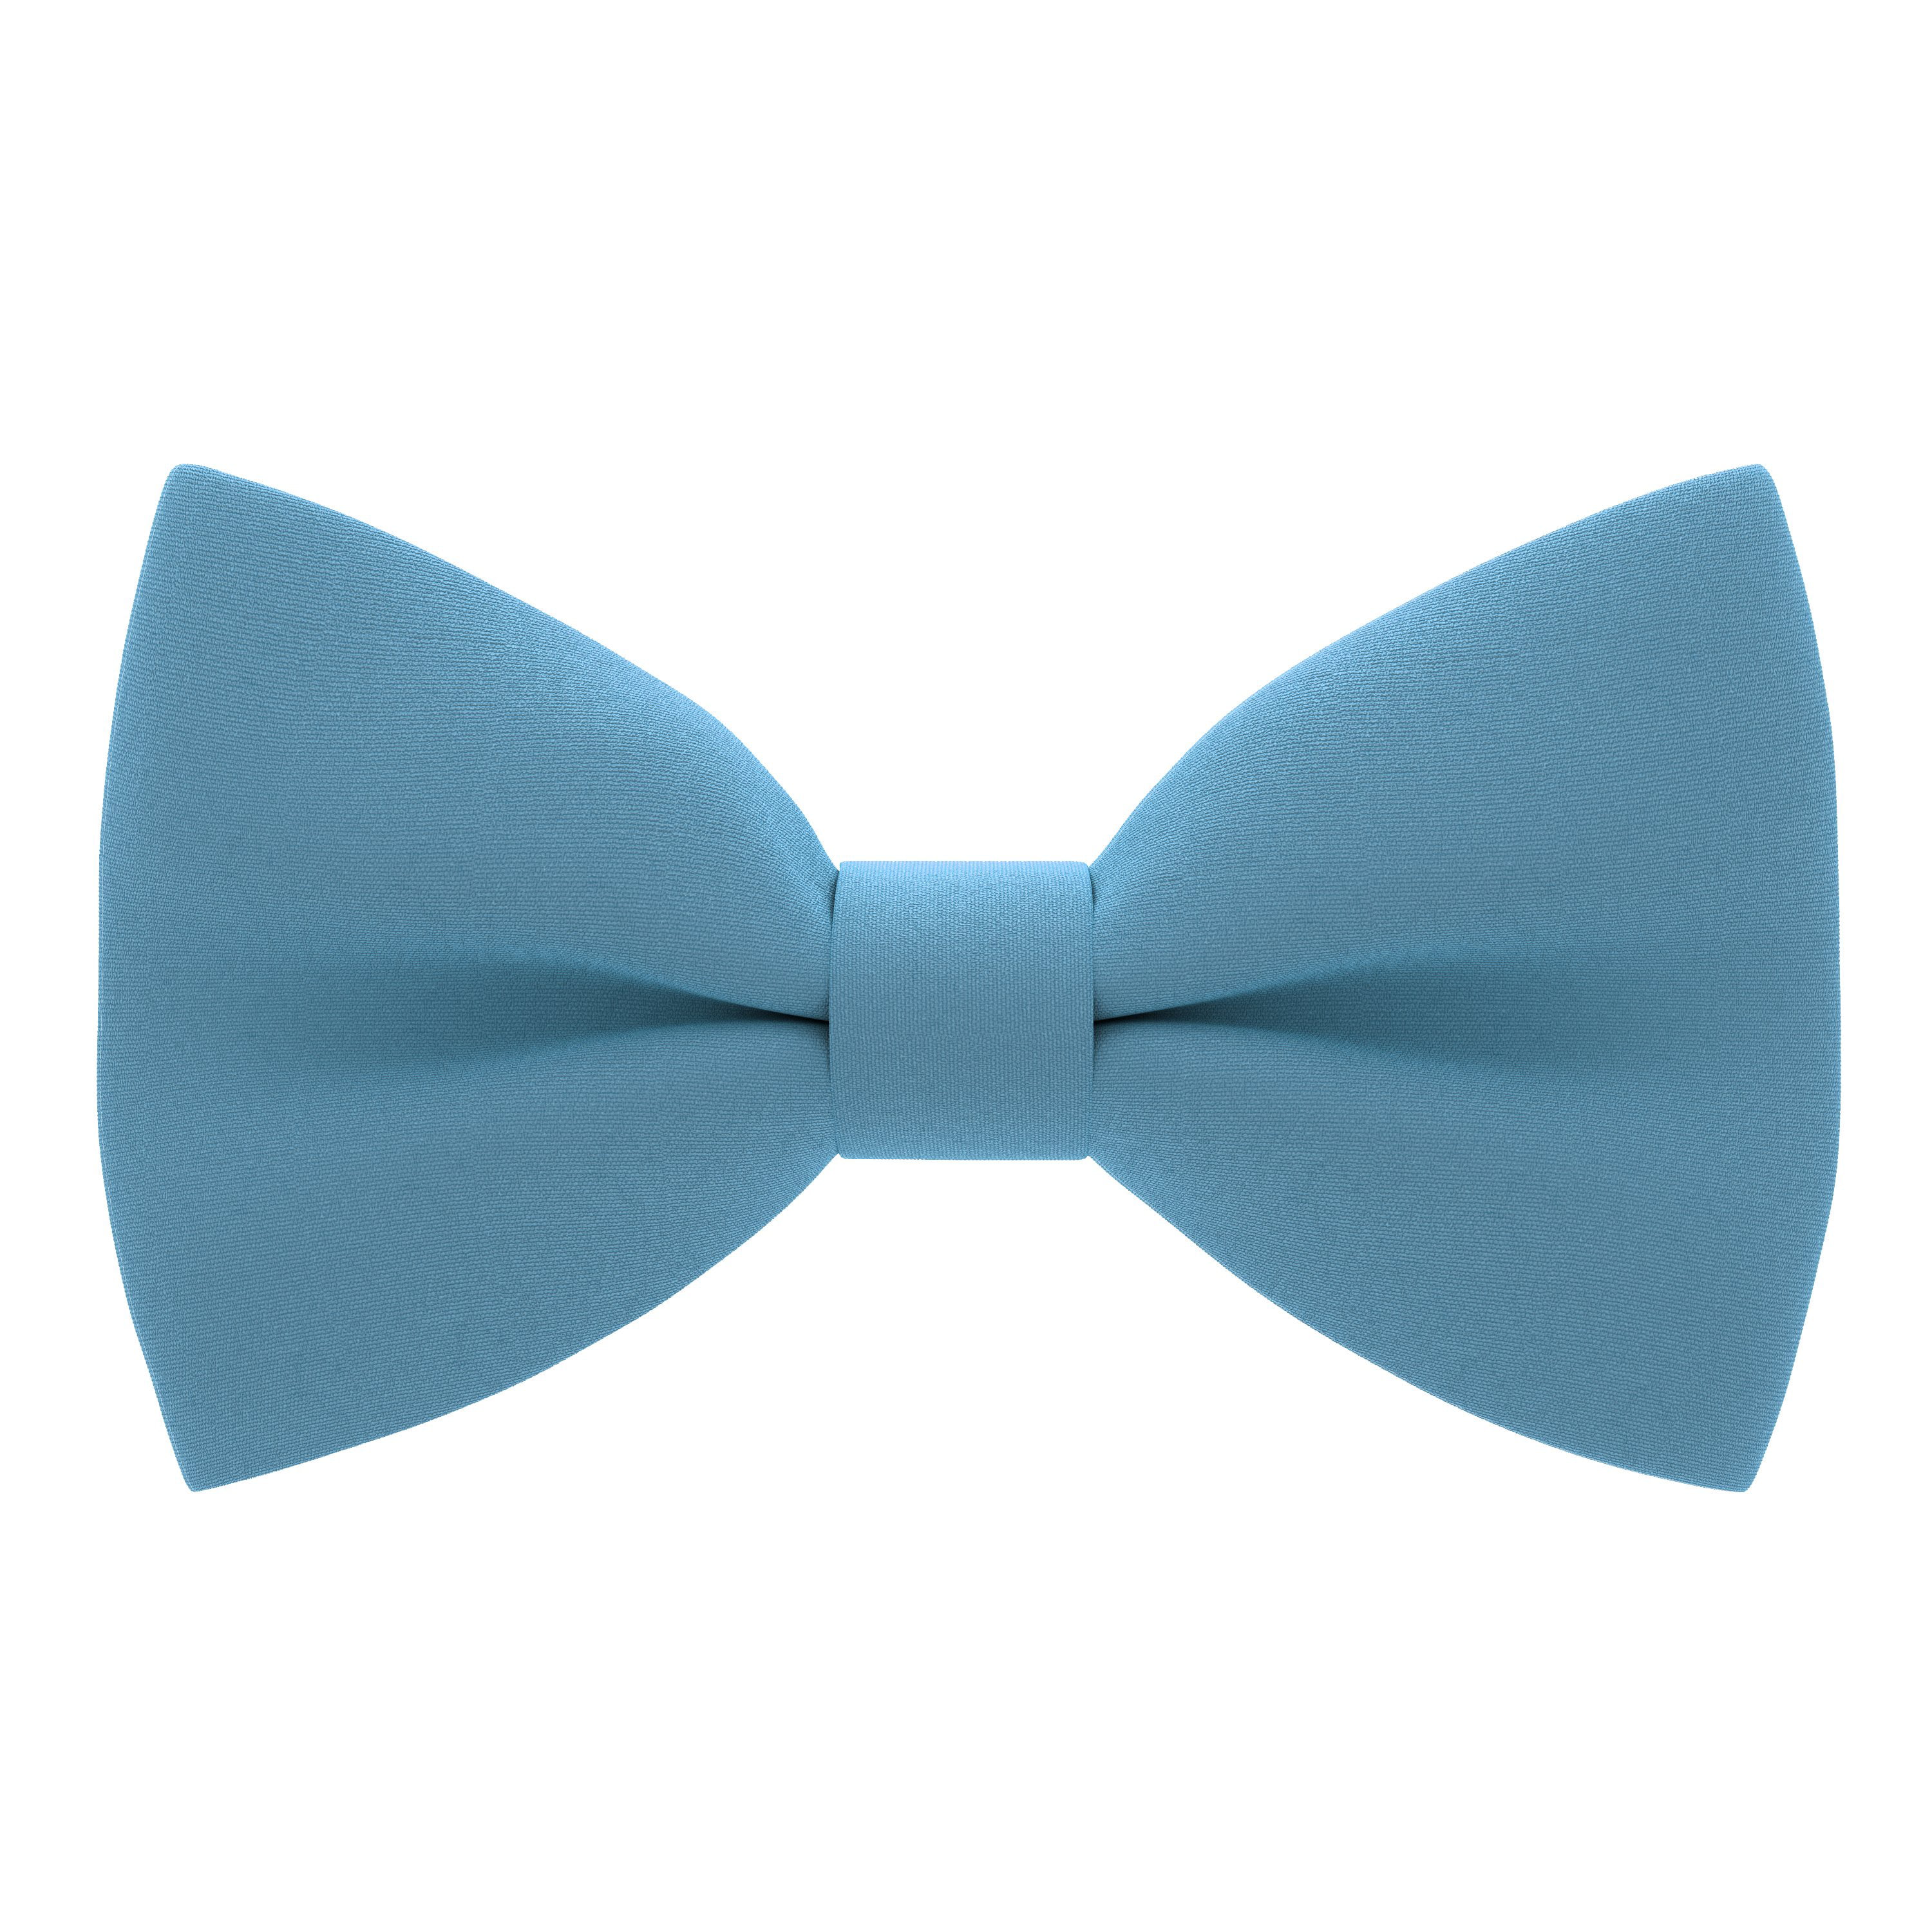 Classic New TEAL green blue Men's Pre-tied Bowtie Bow tie wedding Party Prom